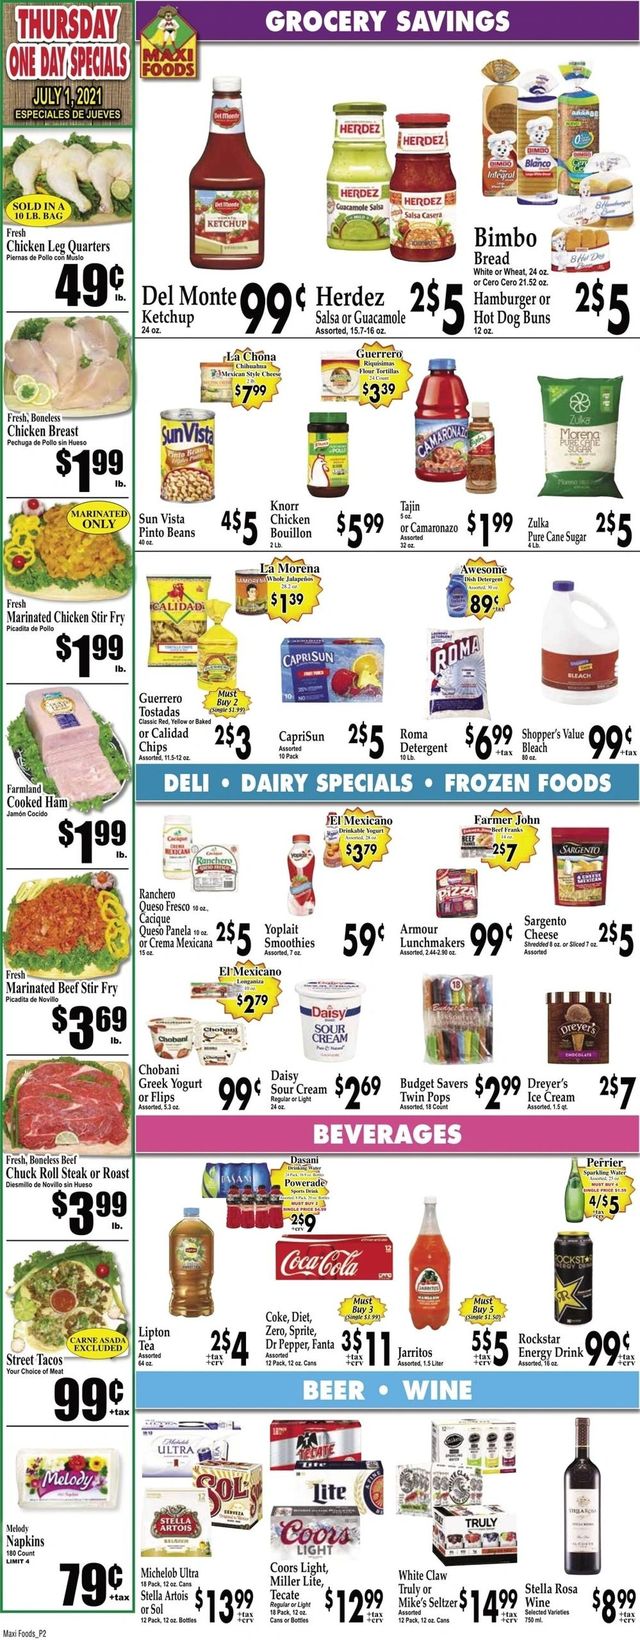 Maxi Foods Ad from 06/30/2021